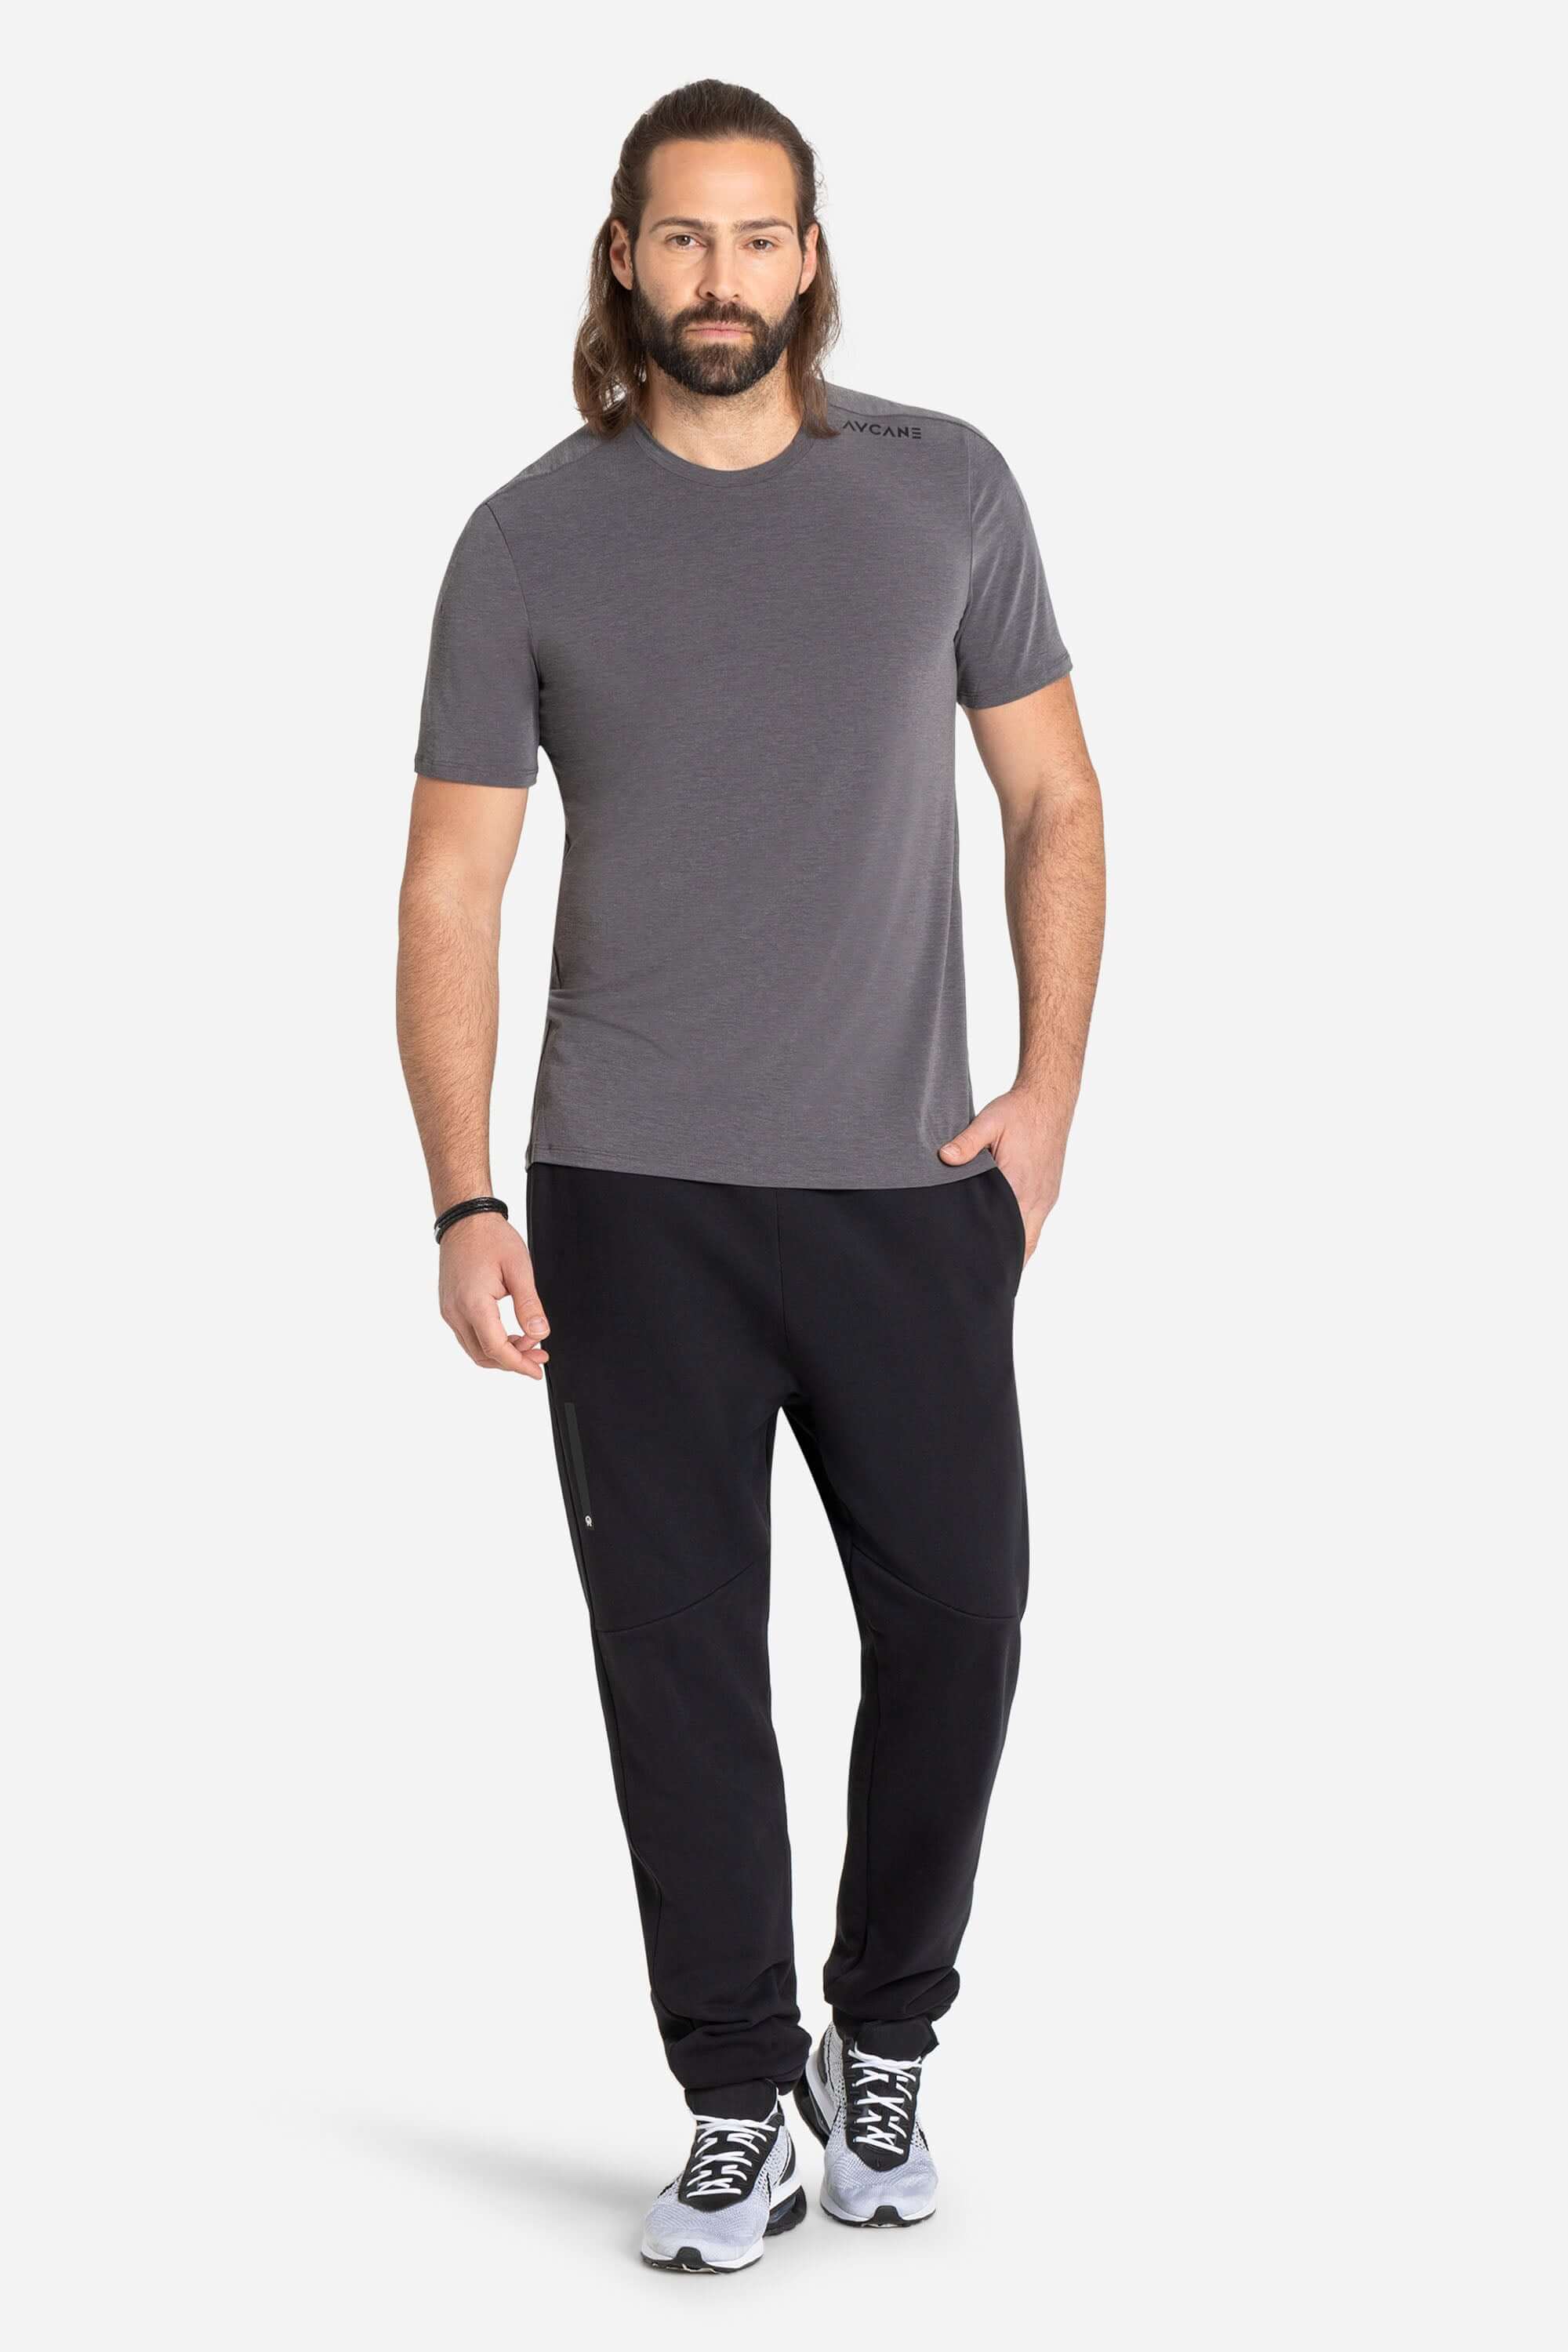 Men in black joggers and grey t-shirt for training or leisure from AYCANE